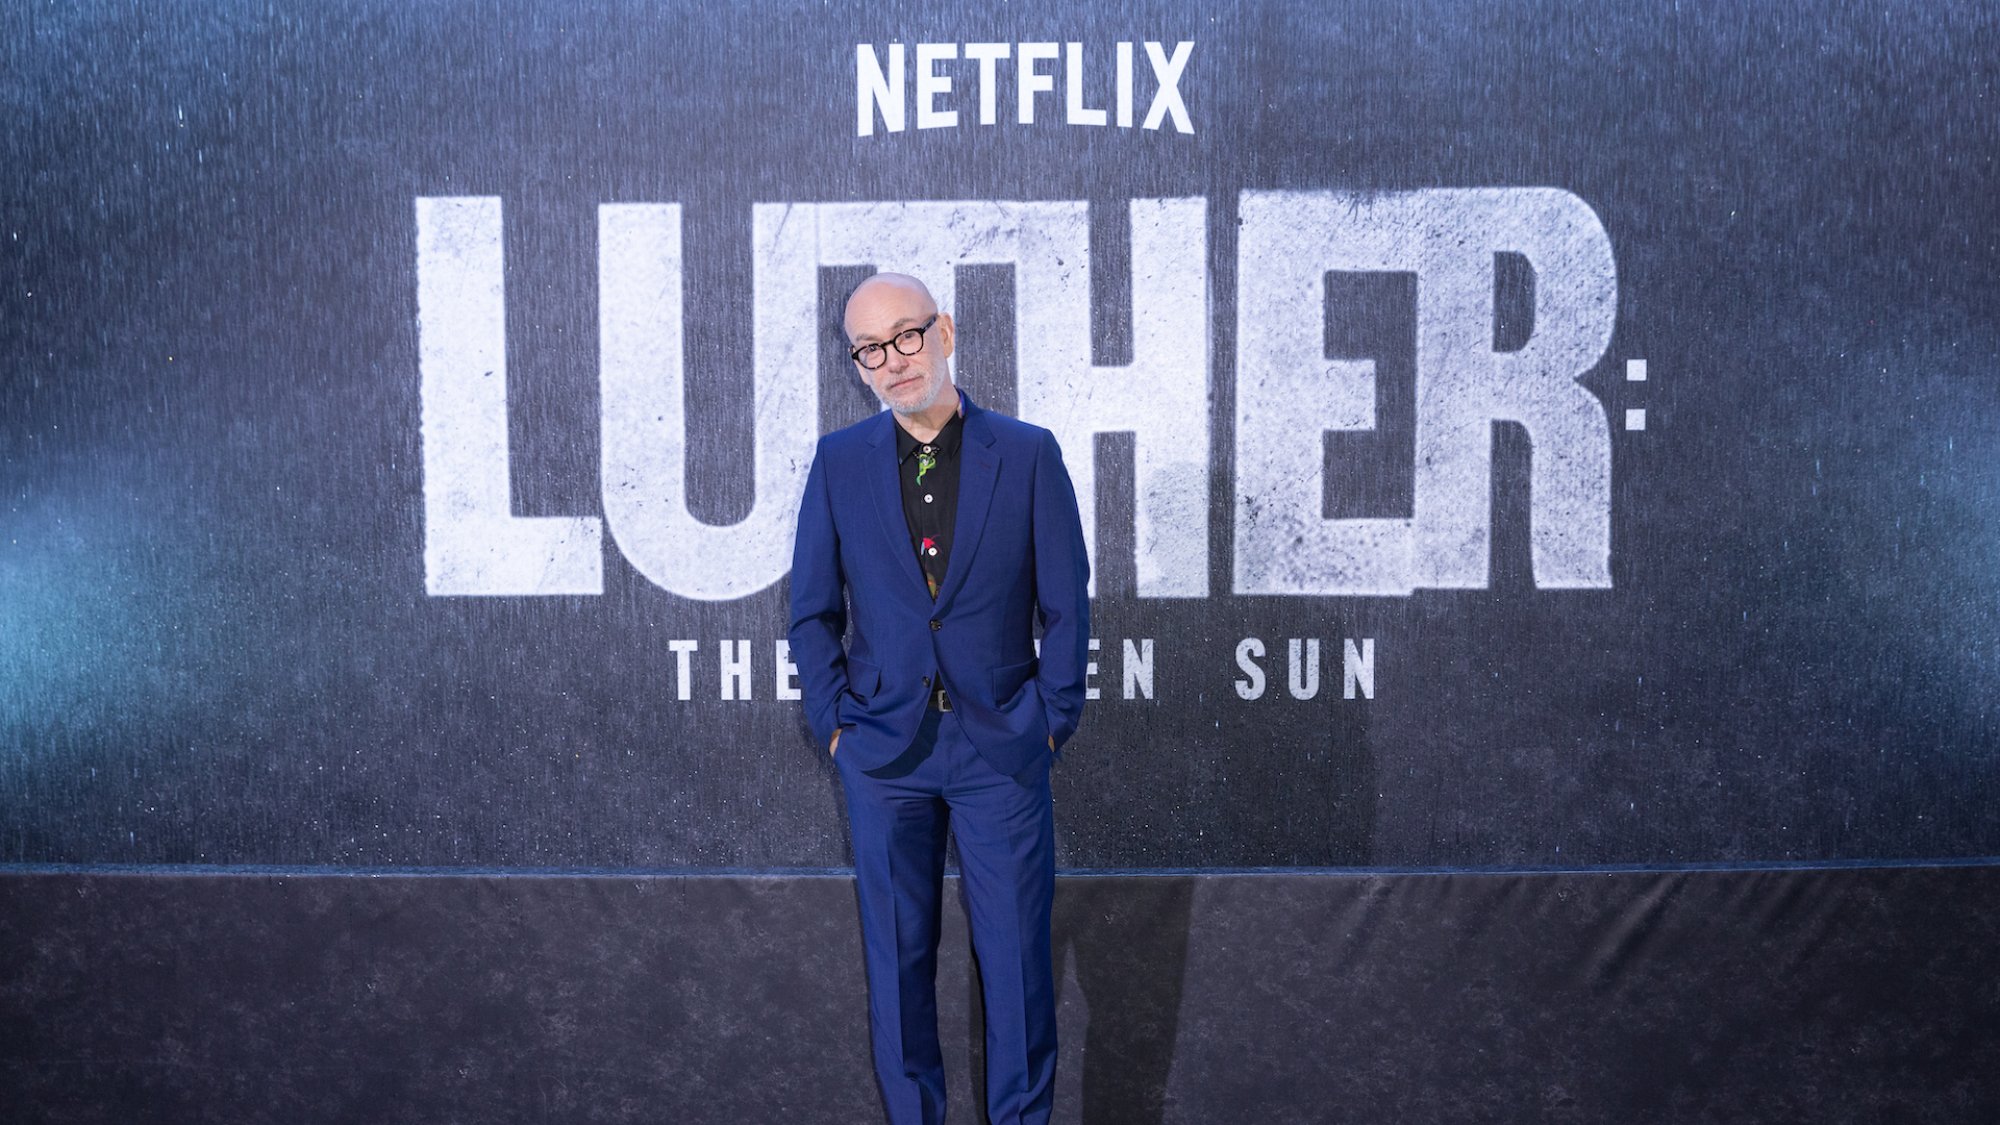 A man in a blue tailored suit and thick-rimmed glasses stands at a film premiere with the words "Netflix, Luther: The Fallen Sun" behind him.